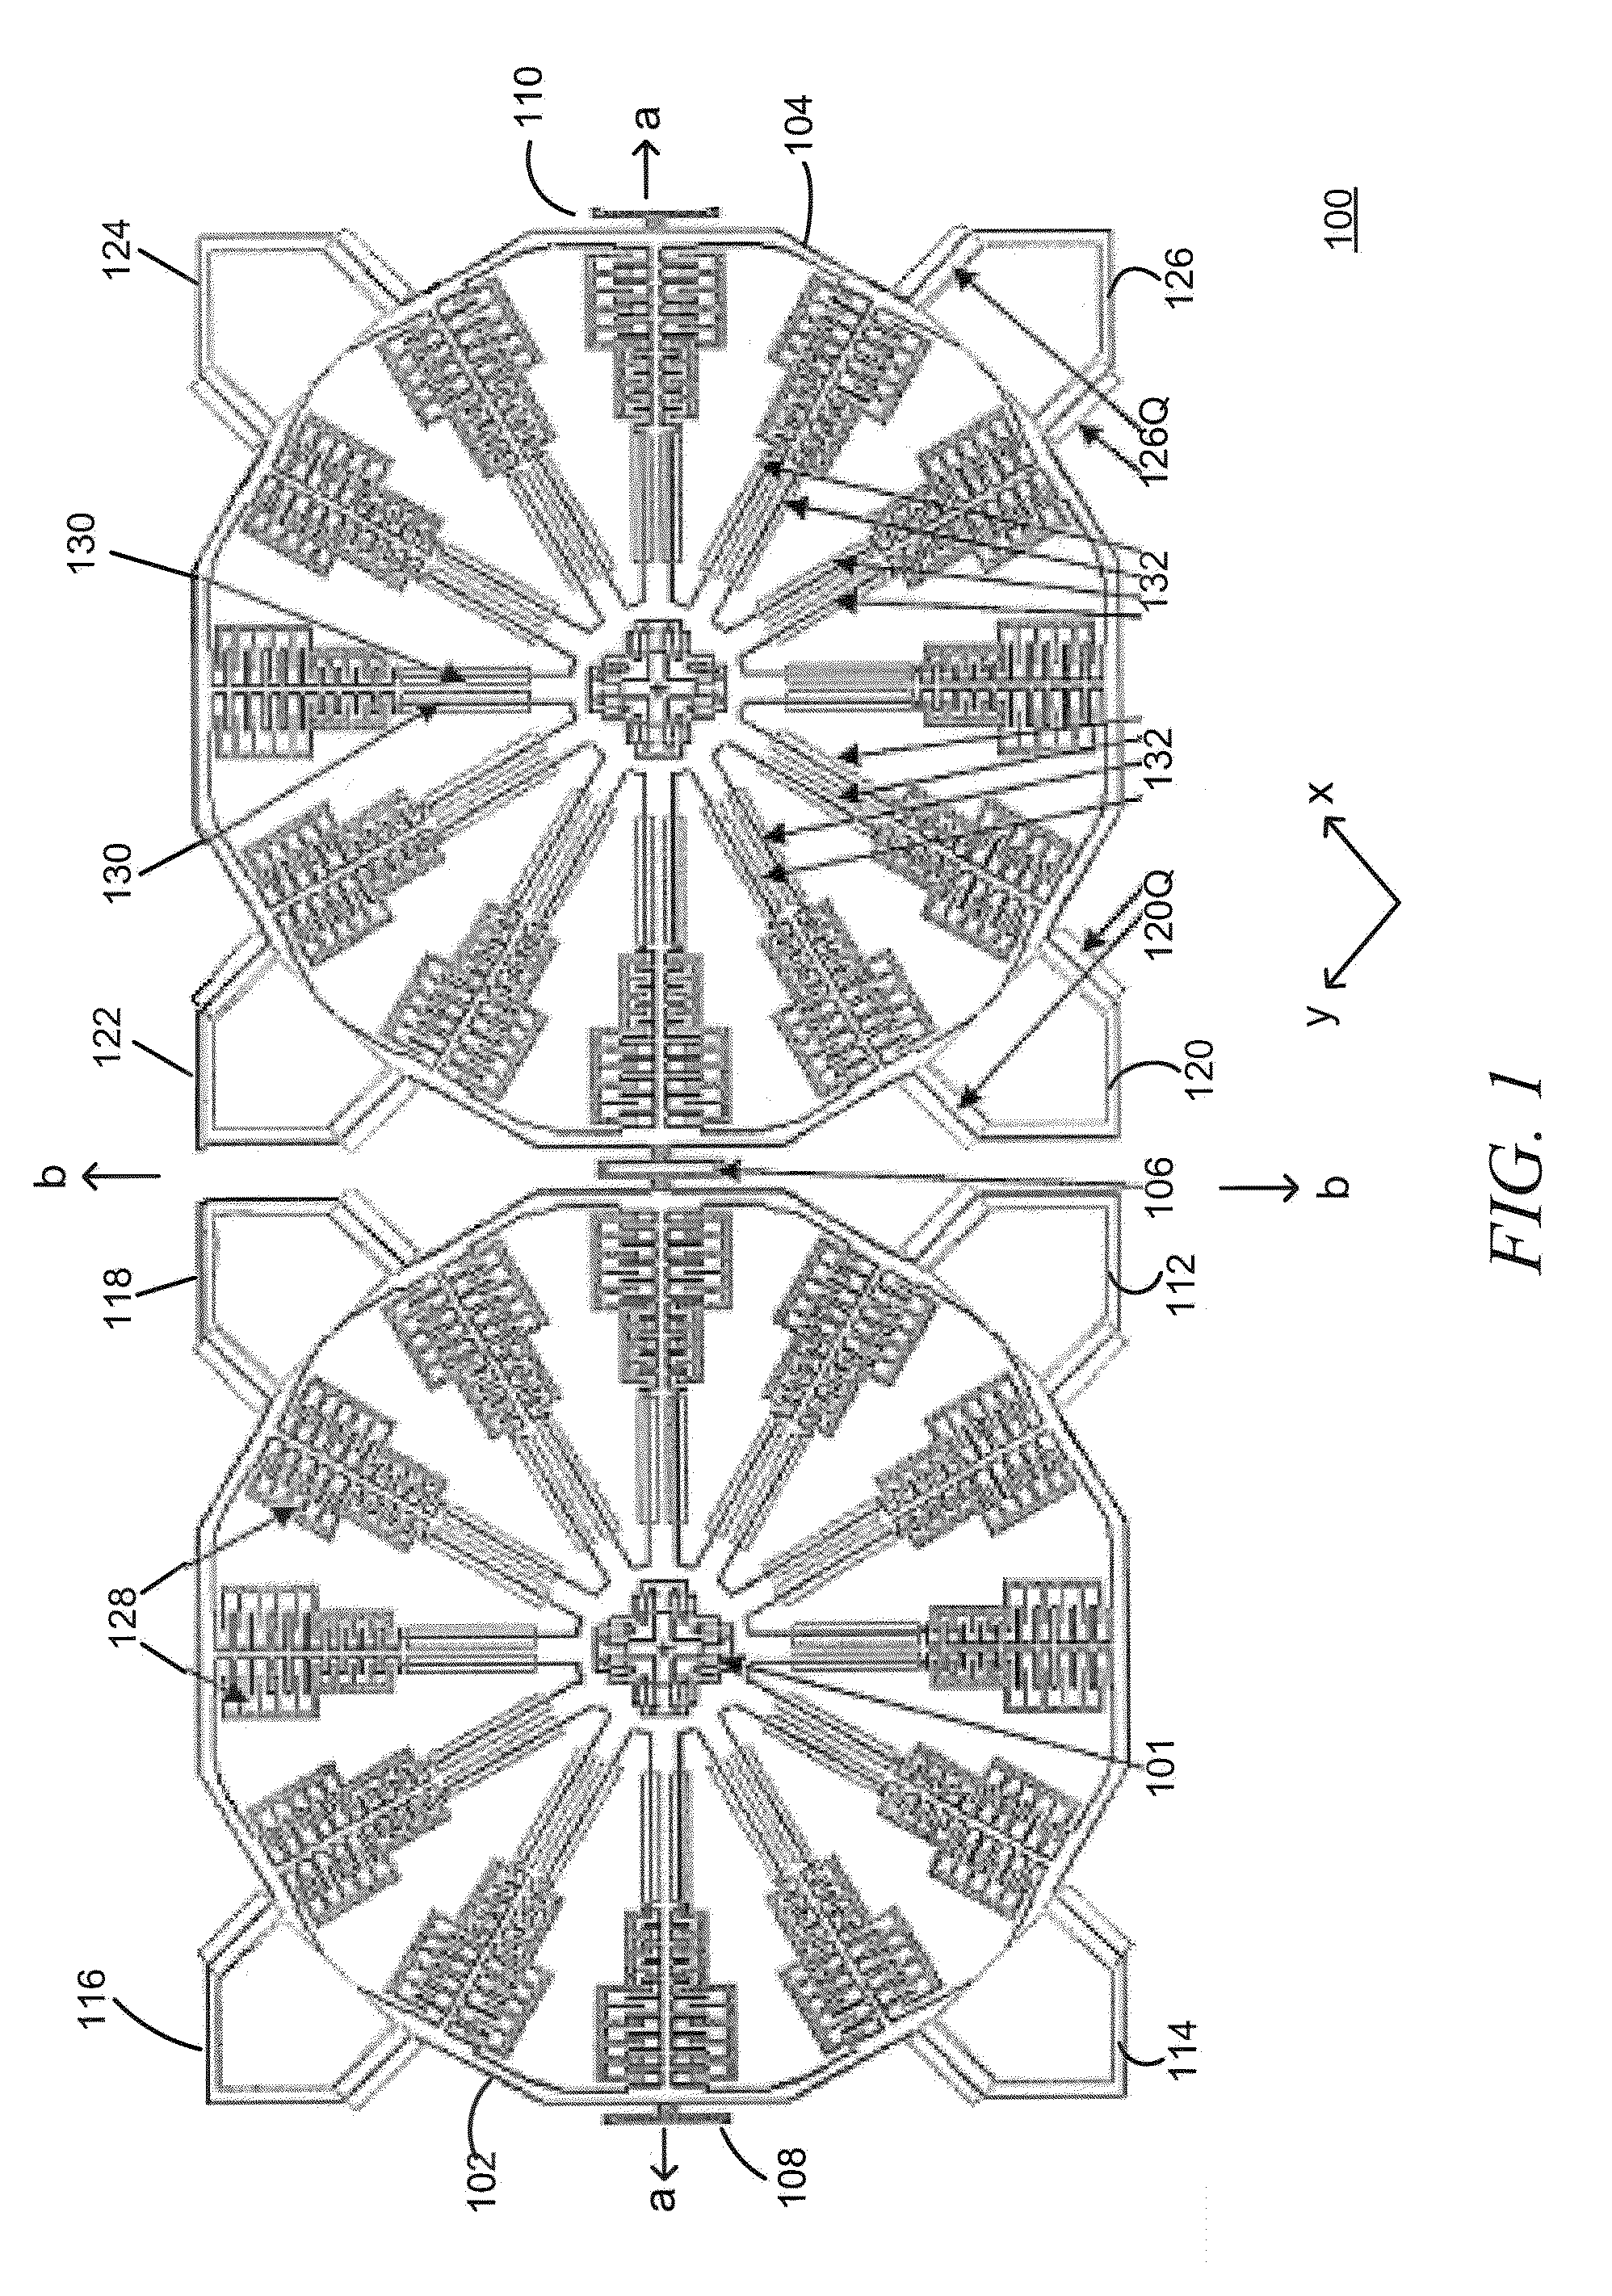 Mode-matching apparatus and method for micromachined inertial sensors